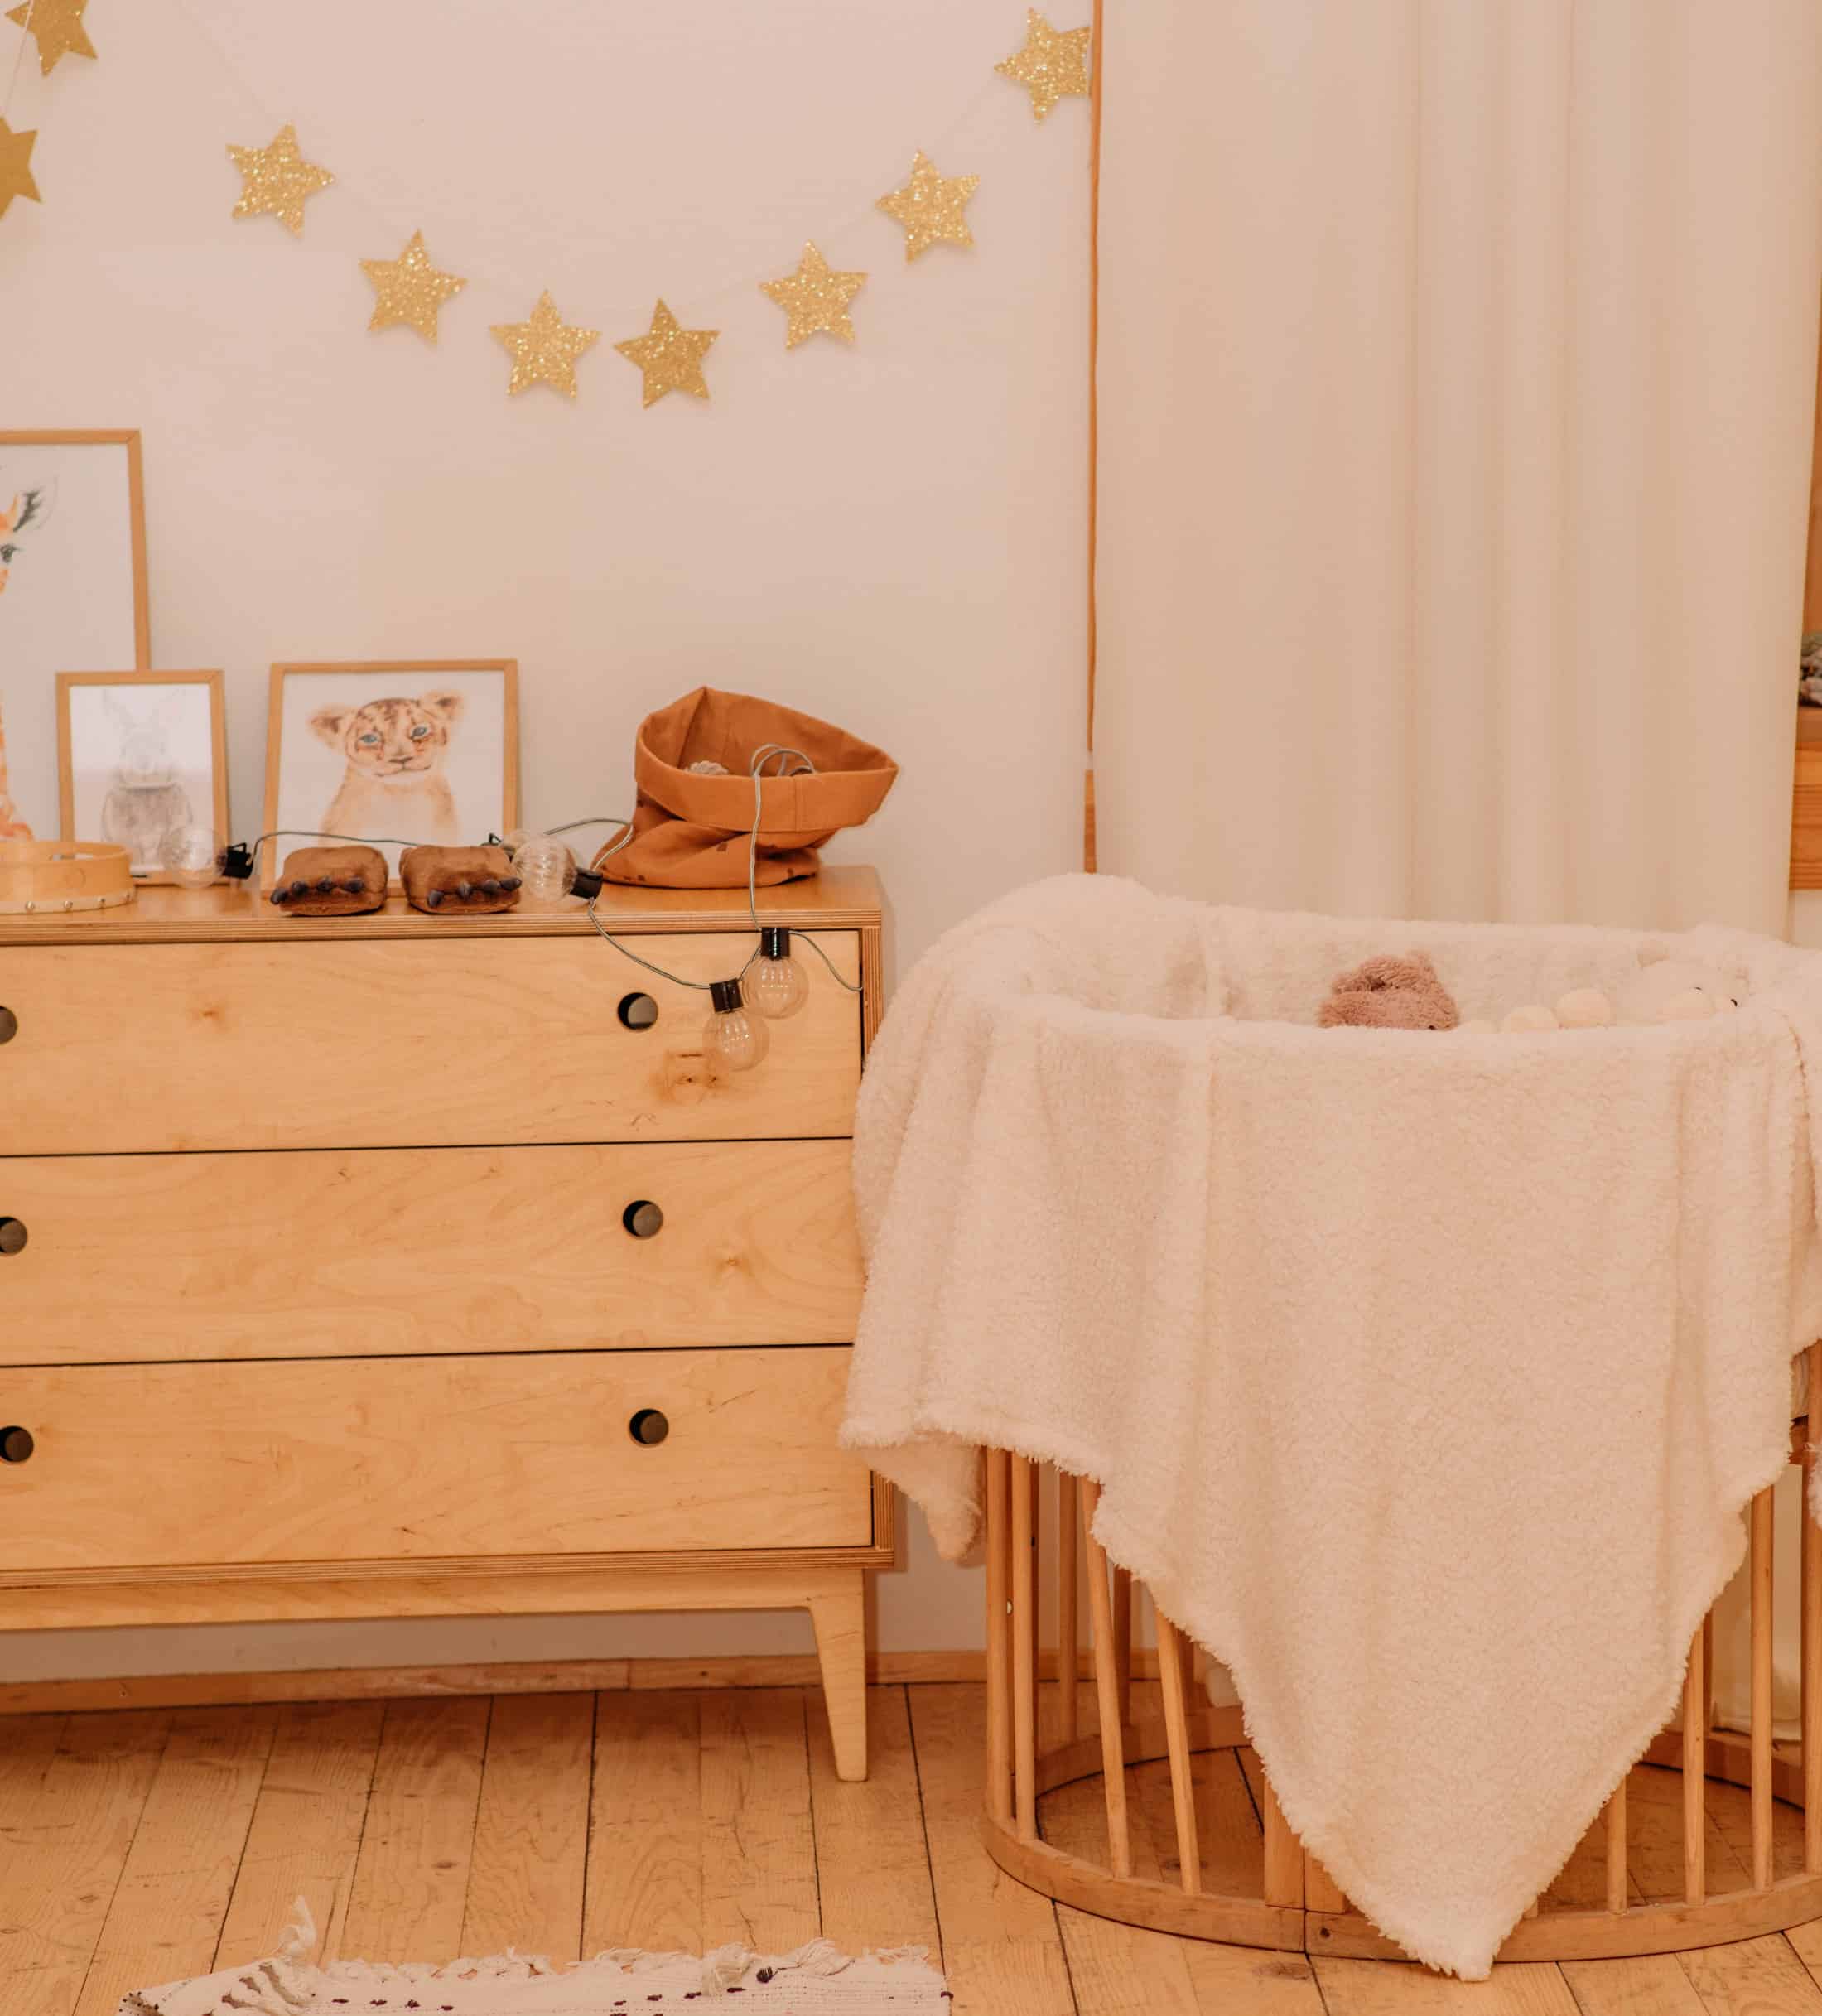 How to keep baby’s room clean?